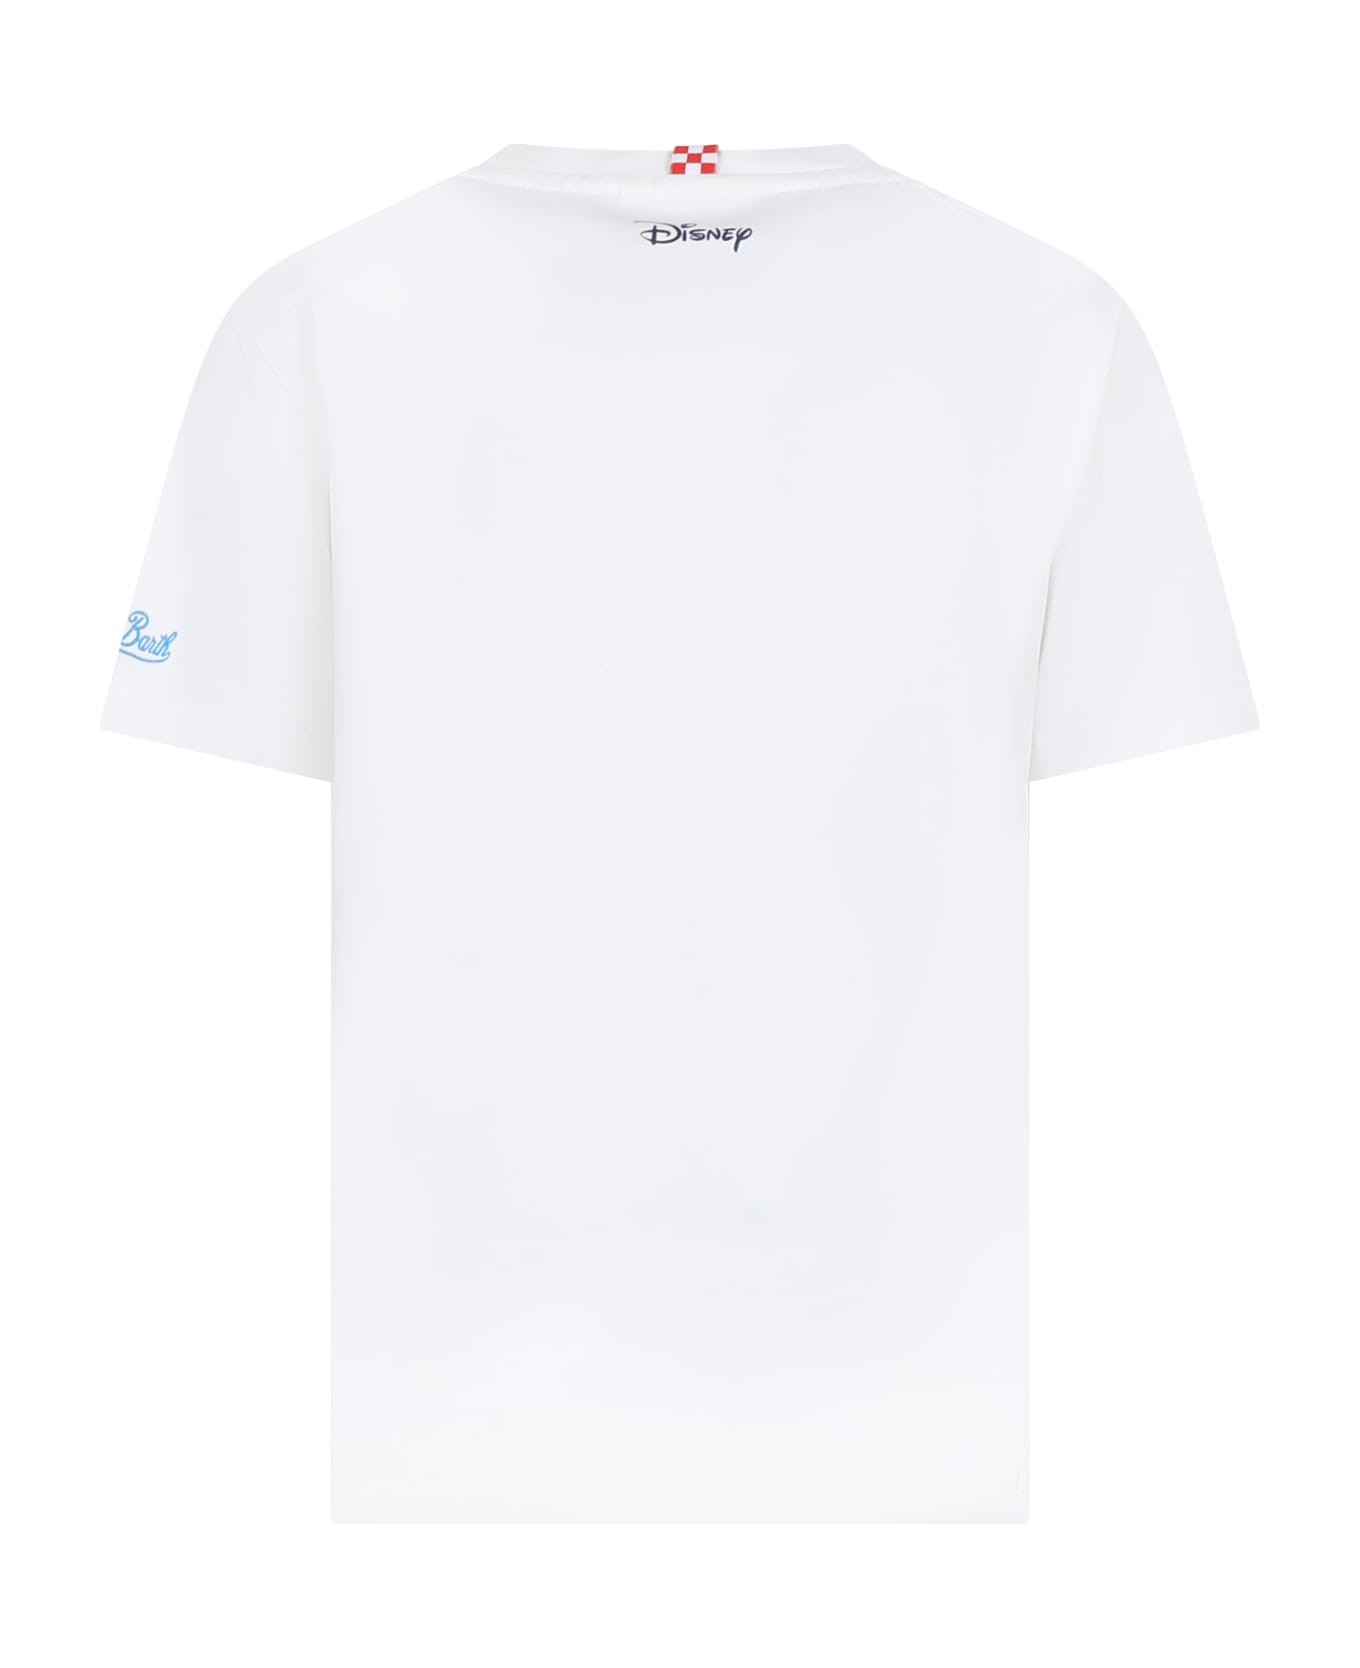 MC2 Saint Barth White T-shirt For Boy With Mickey Mouse And Logo - White